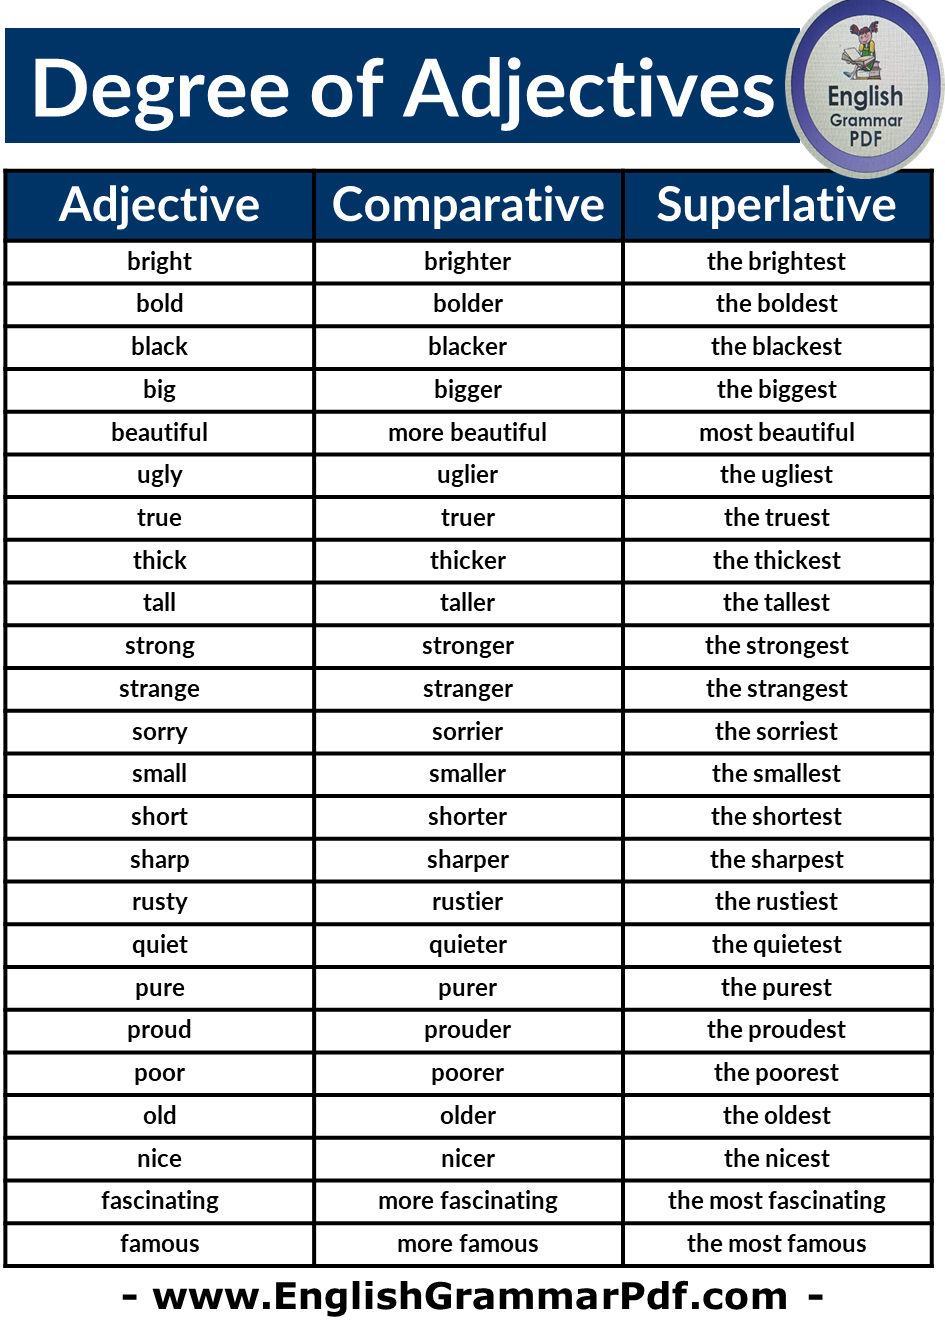 Degrees of Adjectives, Definition, Positive, Comparative and Superlative Examples